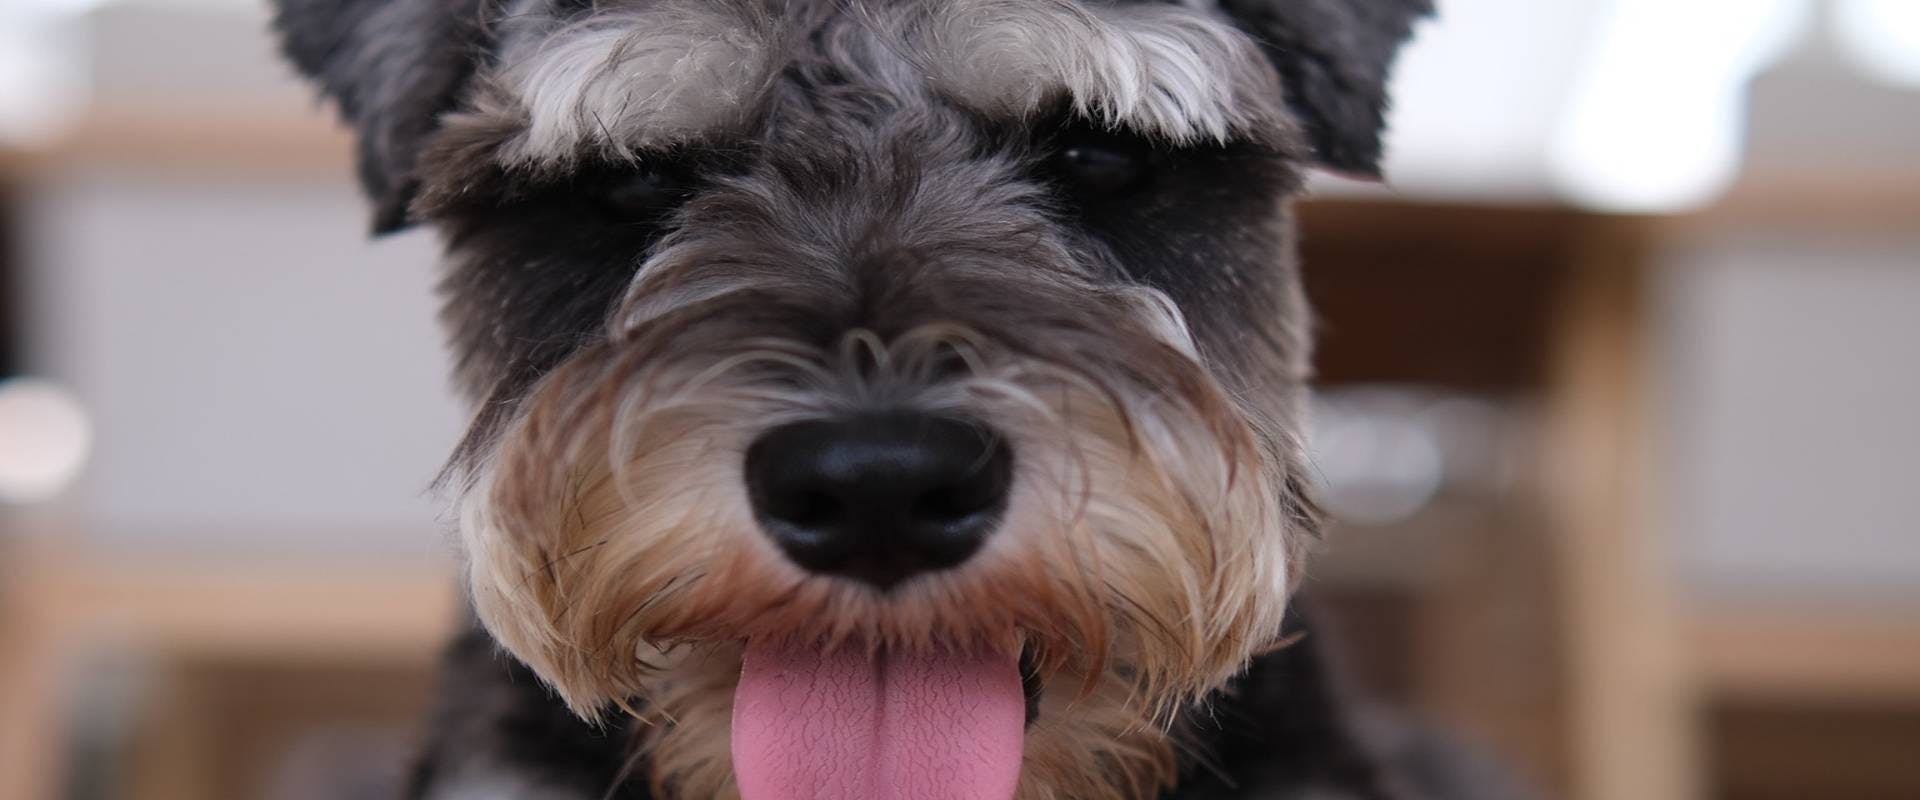 a miniature schnauzer eion and aisling were pet sitting facing the camera with its tongue sticking out